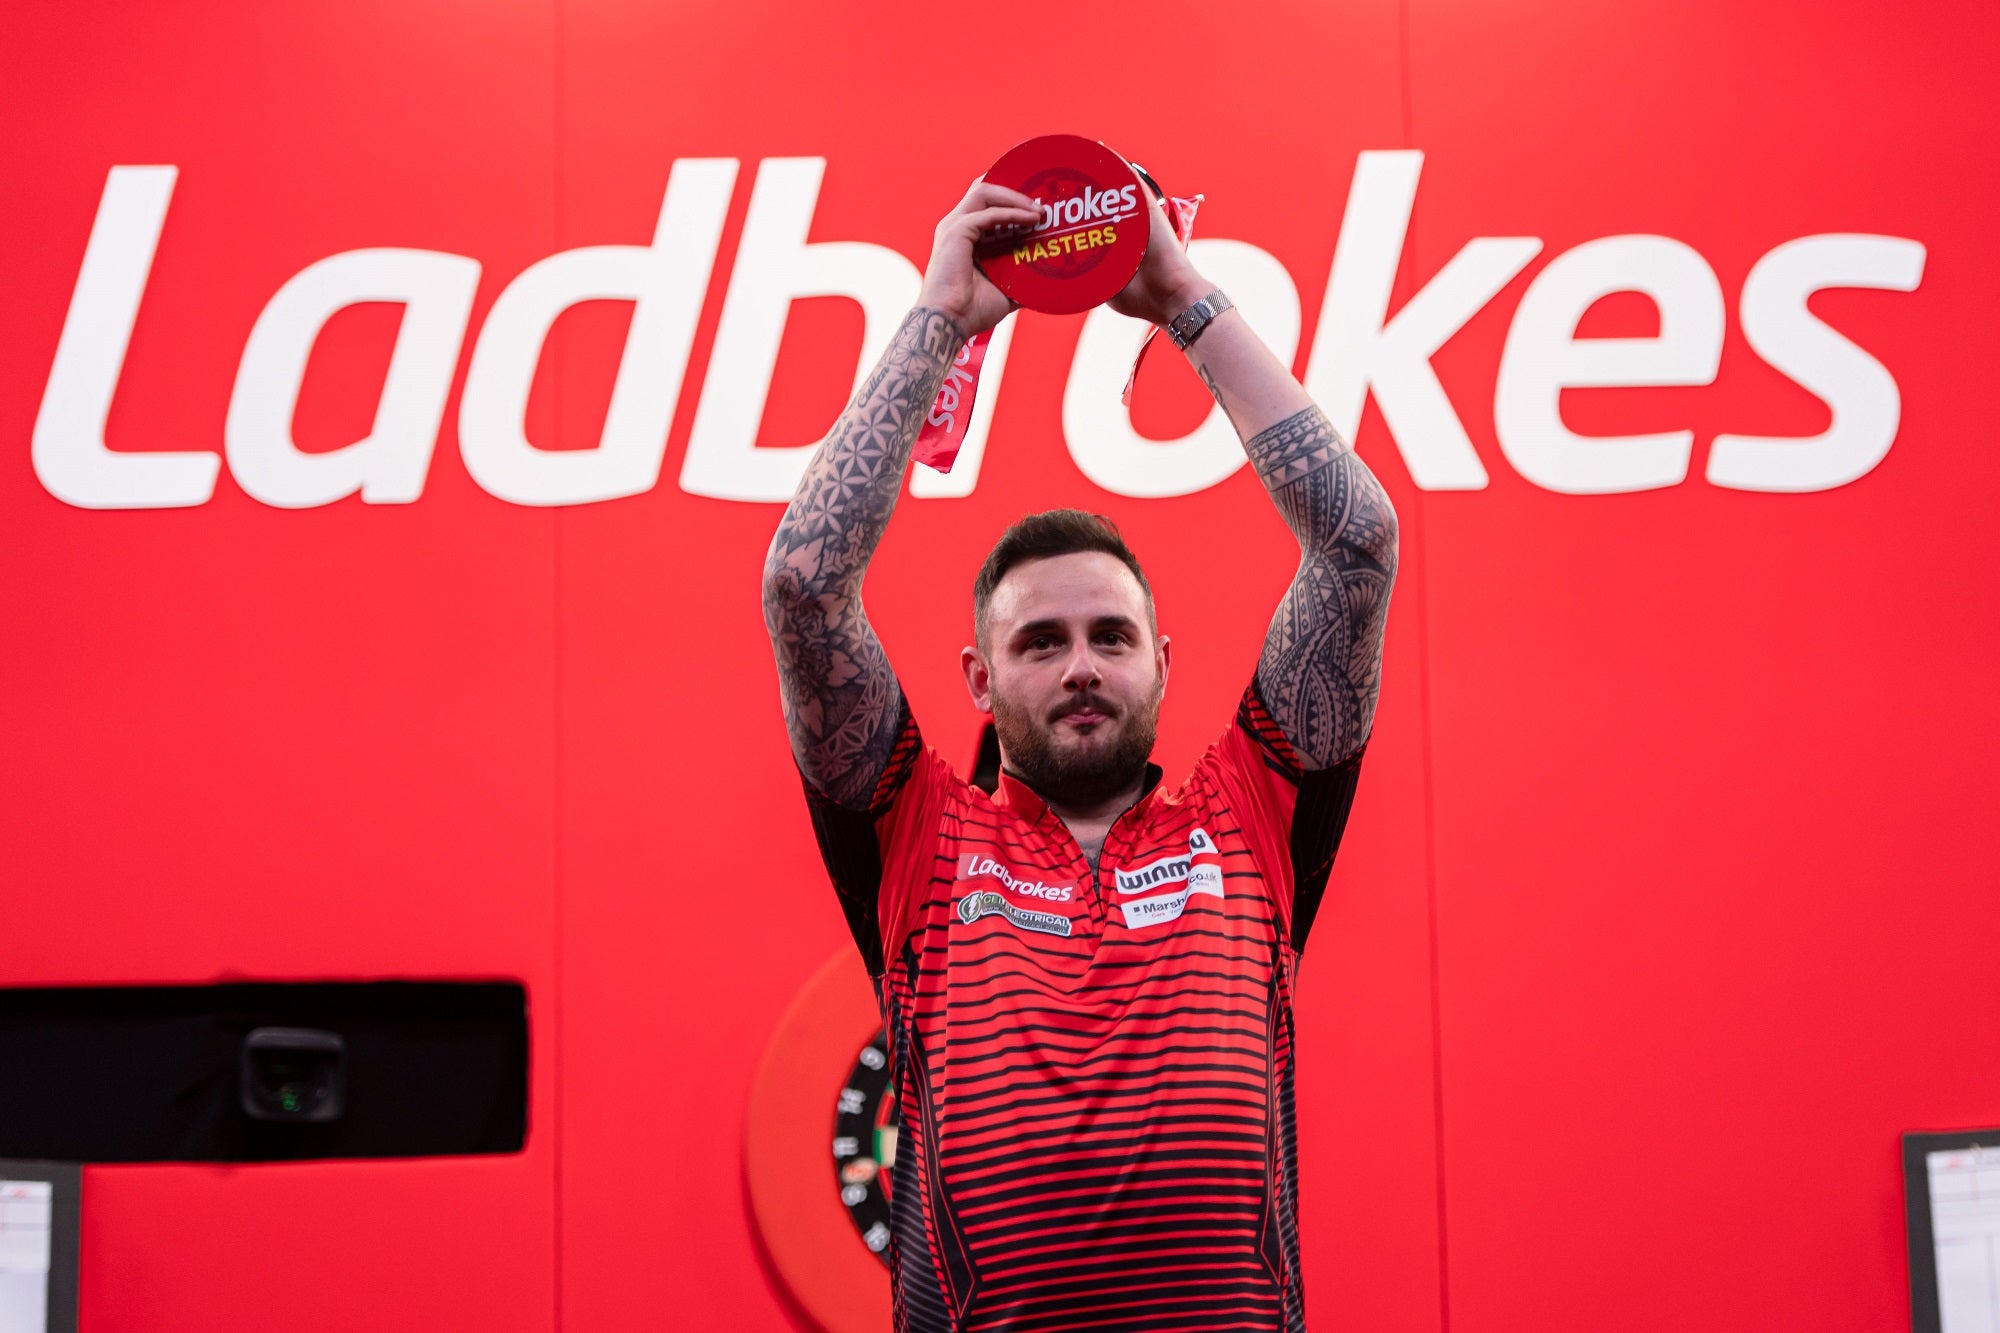 Emotional Cullen secures maiden TV title at Ladbrokes Masters